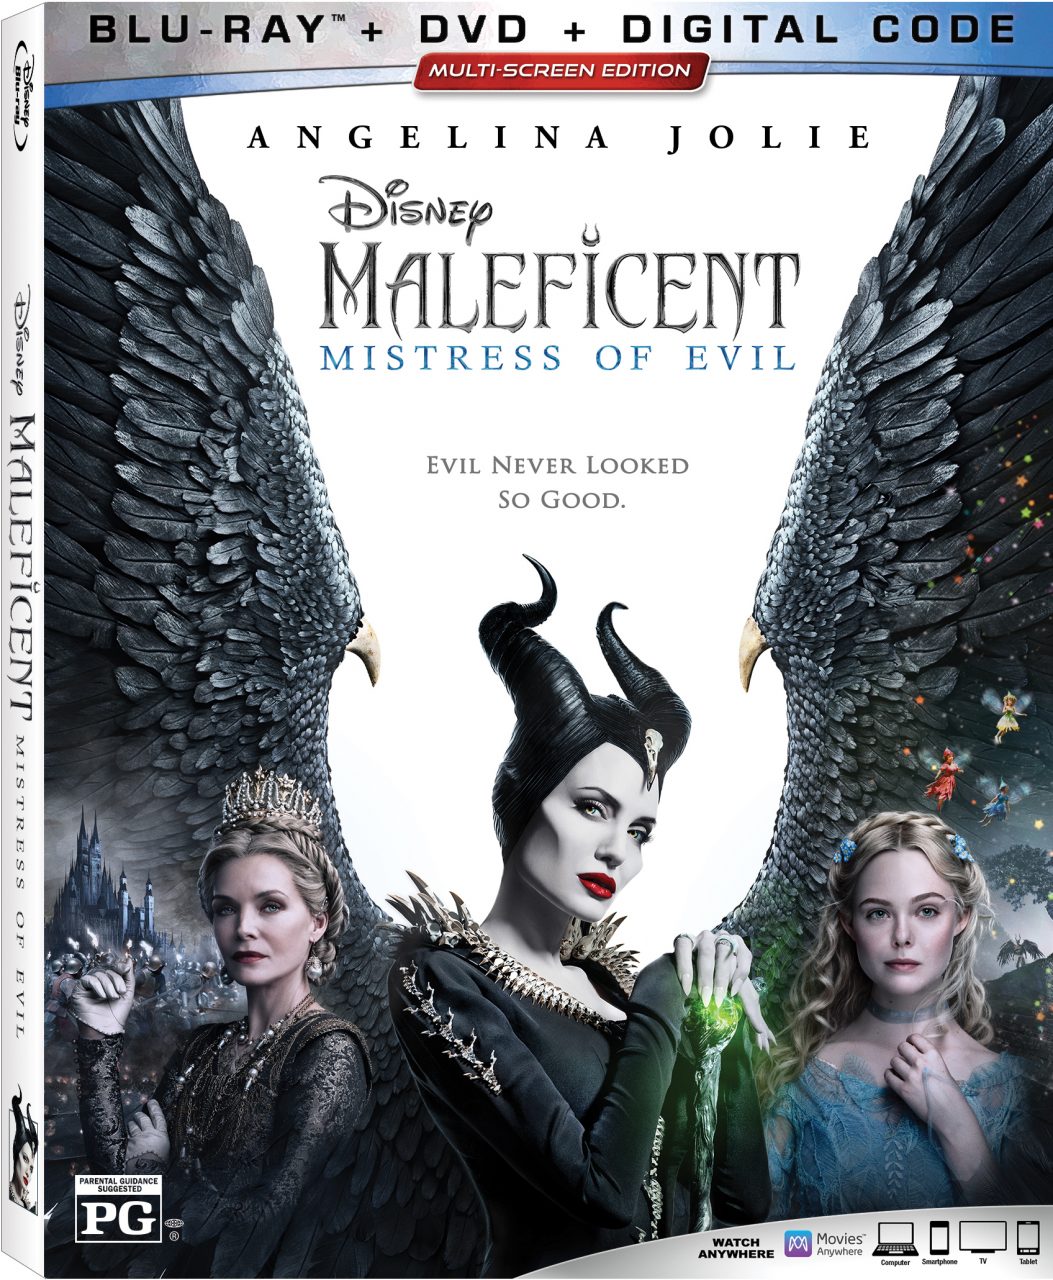 Maleficent: Mistress Of Evil Blu-Ray Combo Pack cover (Walt Disney Studios Home Entertainment)